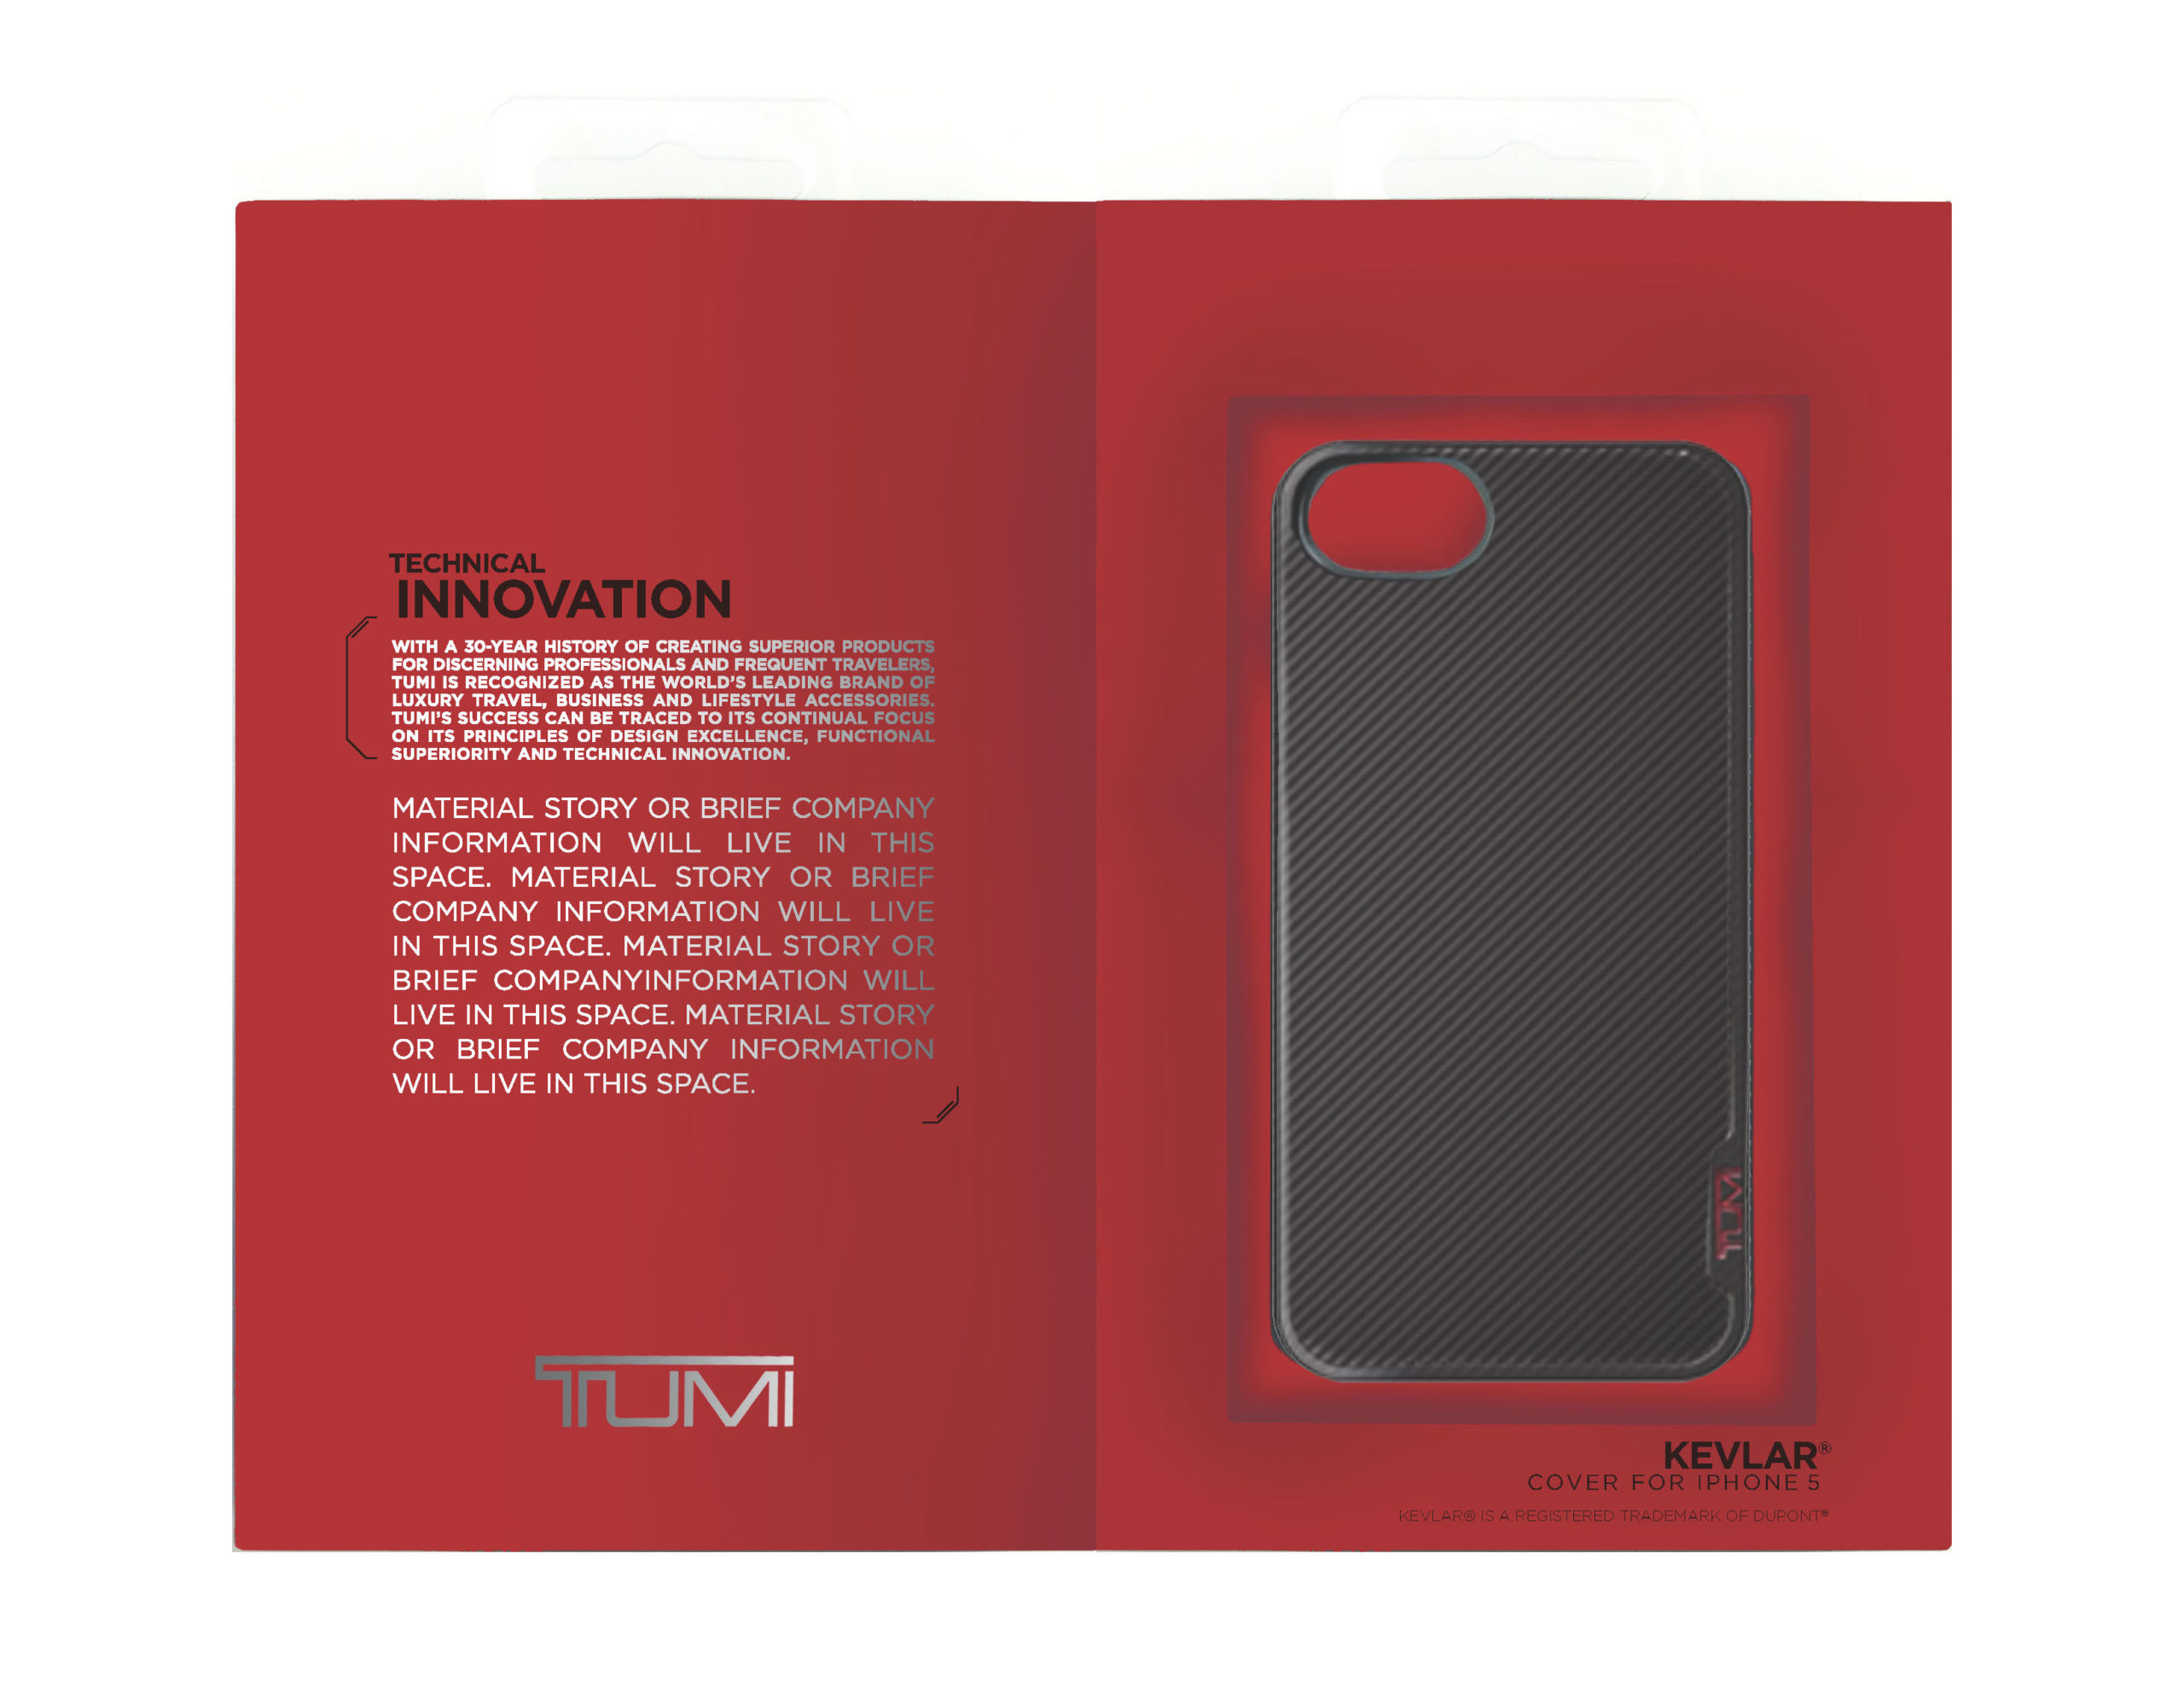 TUMI IPHONE 5 PACKAGING-REV 1-6_Page_2